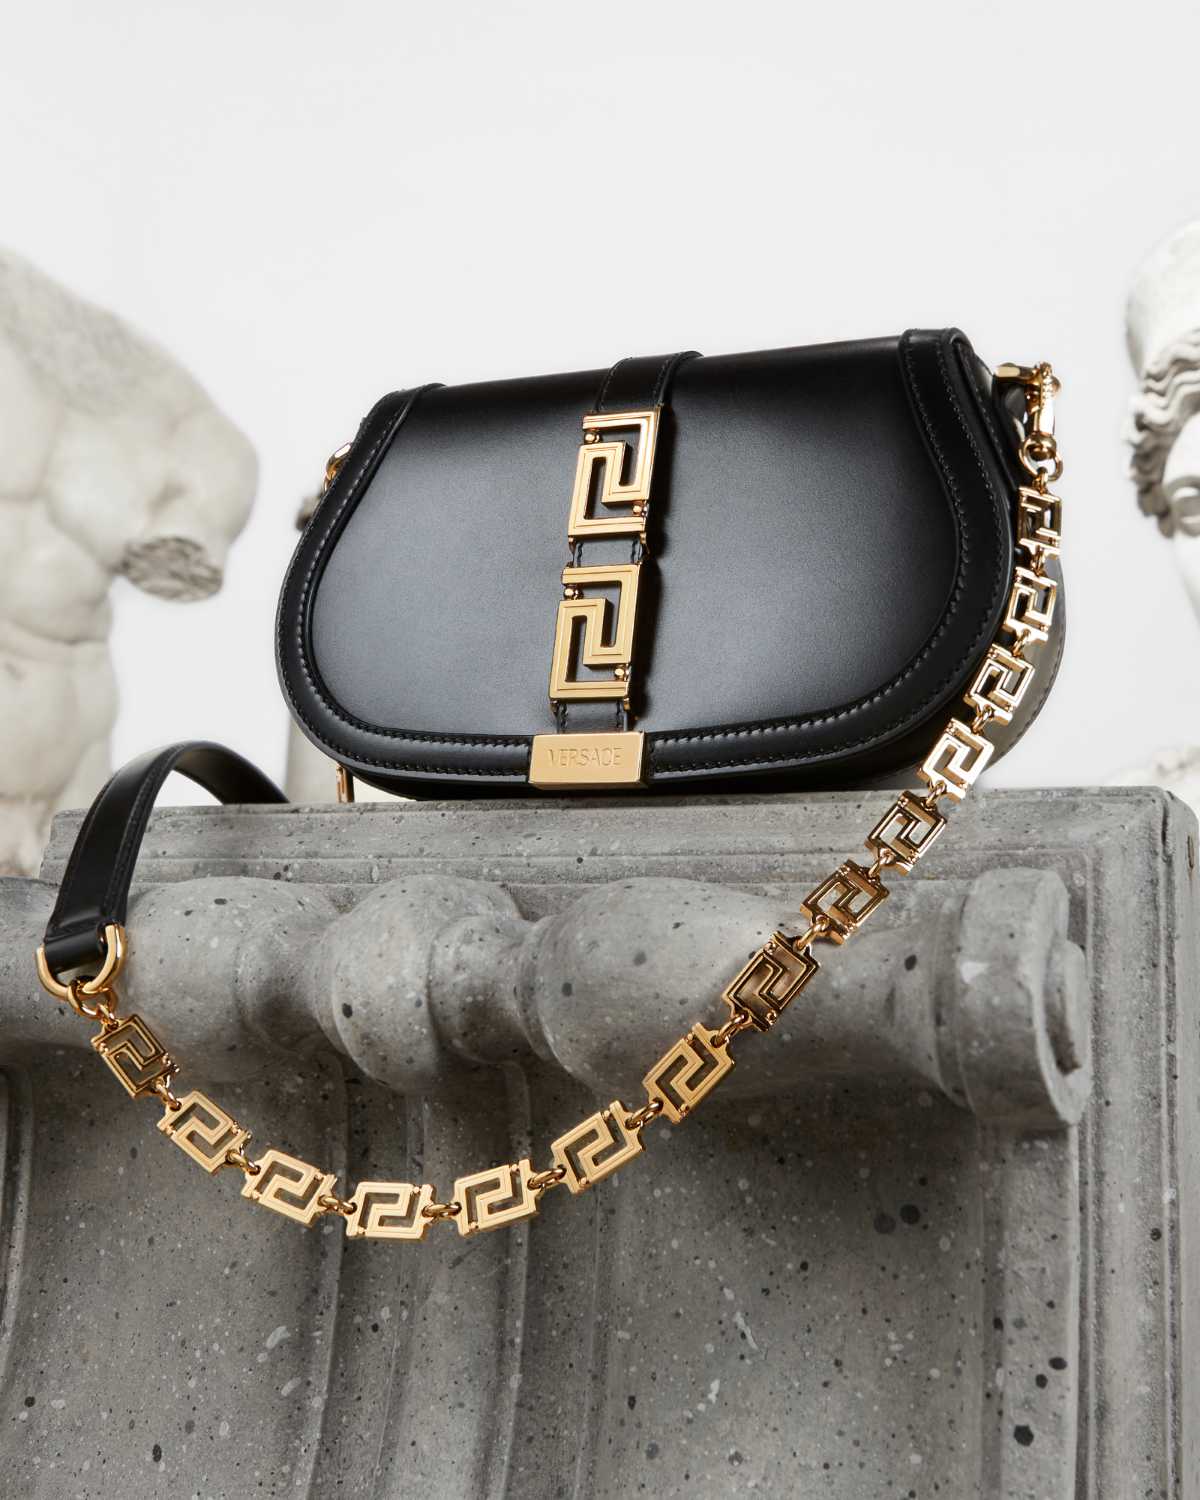 Versace: Versace Introduces A New Line Of Bags & Accessories: Greca Goddess  - Luxferity